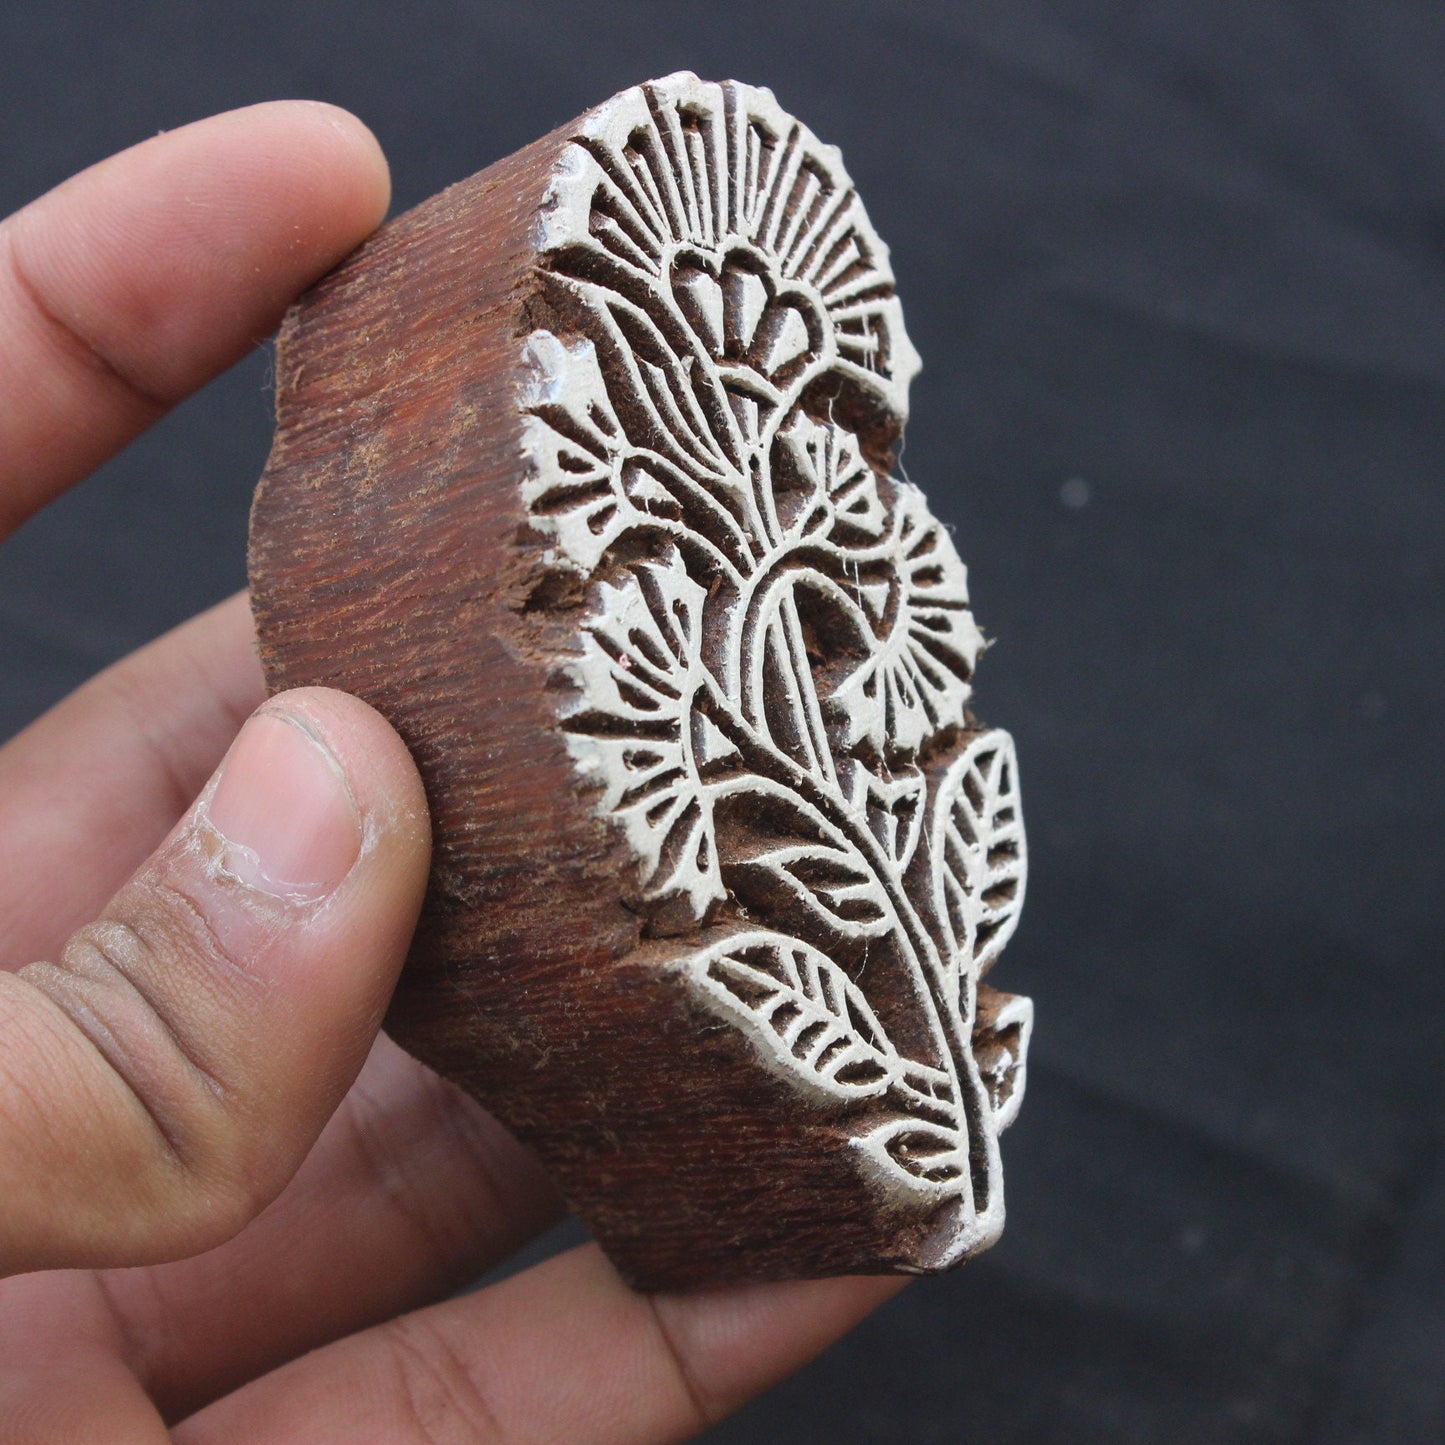 Floral Block Stamp Paisley Wooden Block Stamp Indian Fabric Stamp Flower Wood Block Stamp Indian Textile Block For Printing Fern Soap Stamp